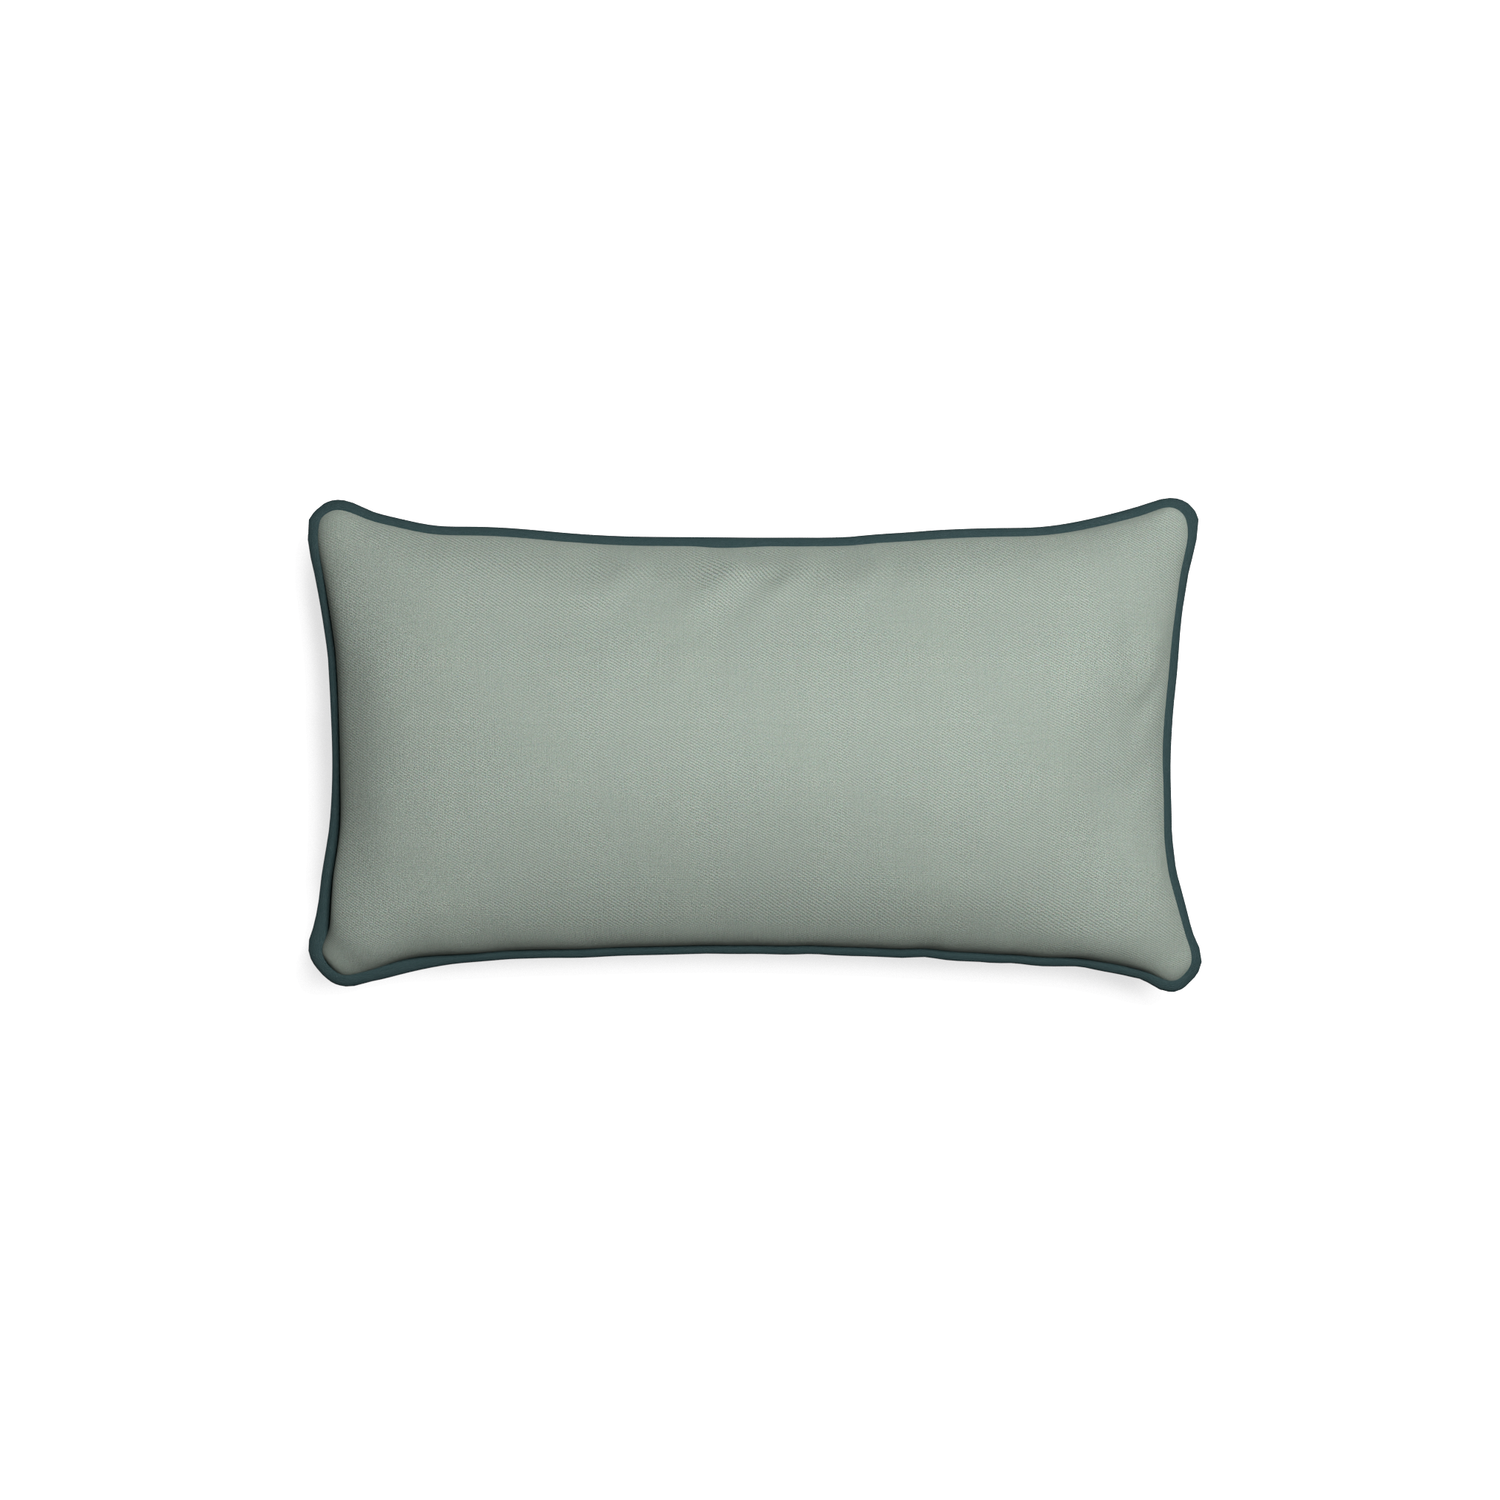 Petite-lumbar sage custom sage green cottonpillow with p piping on white background